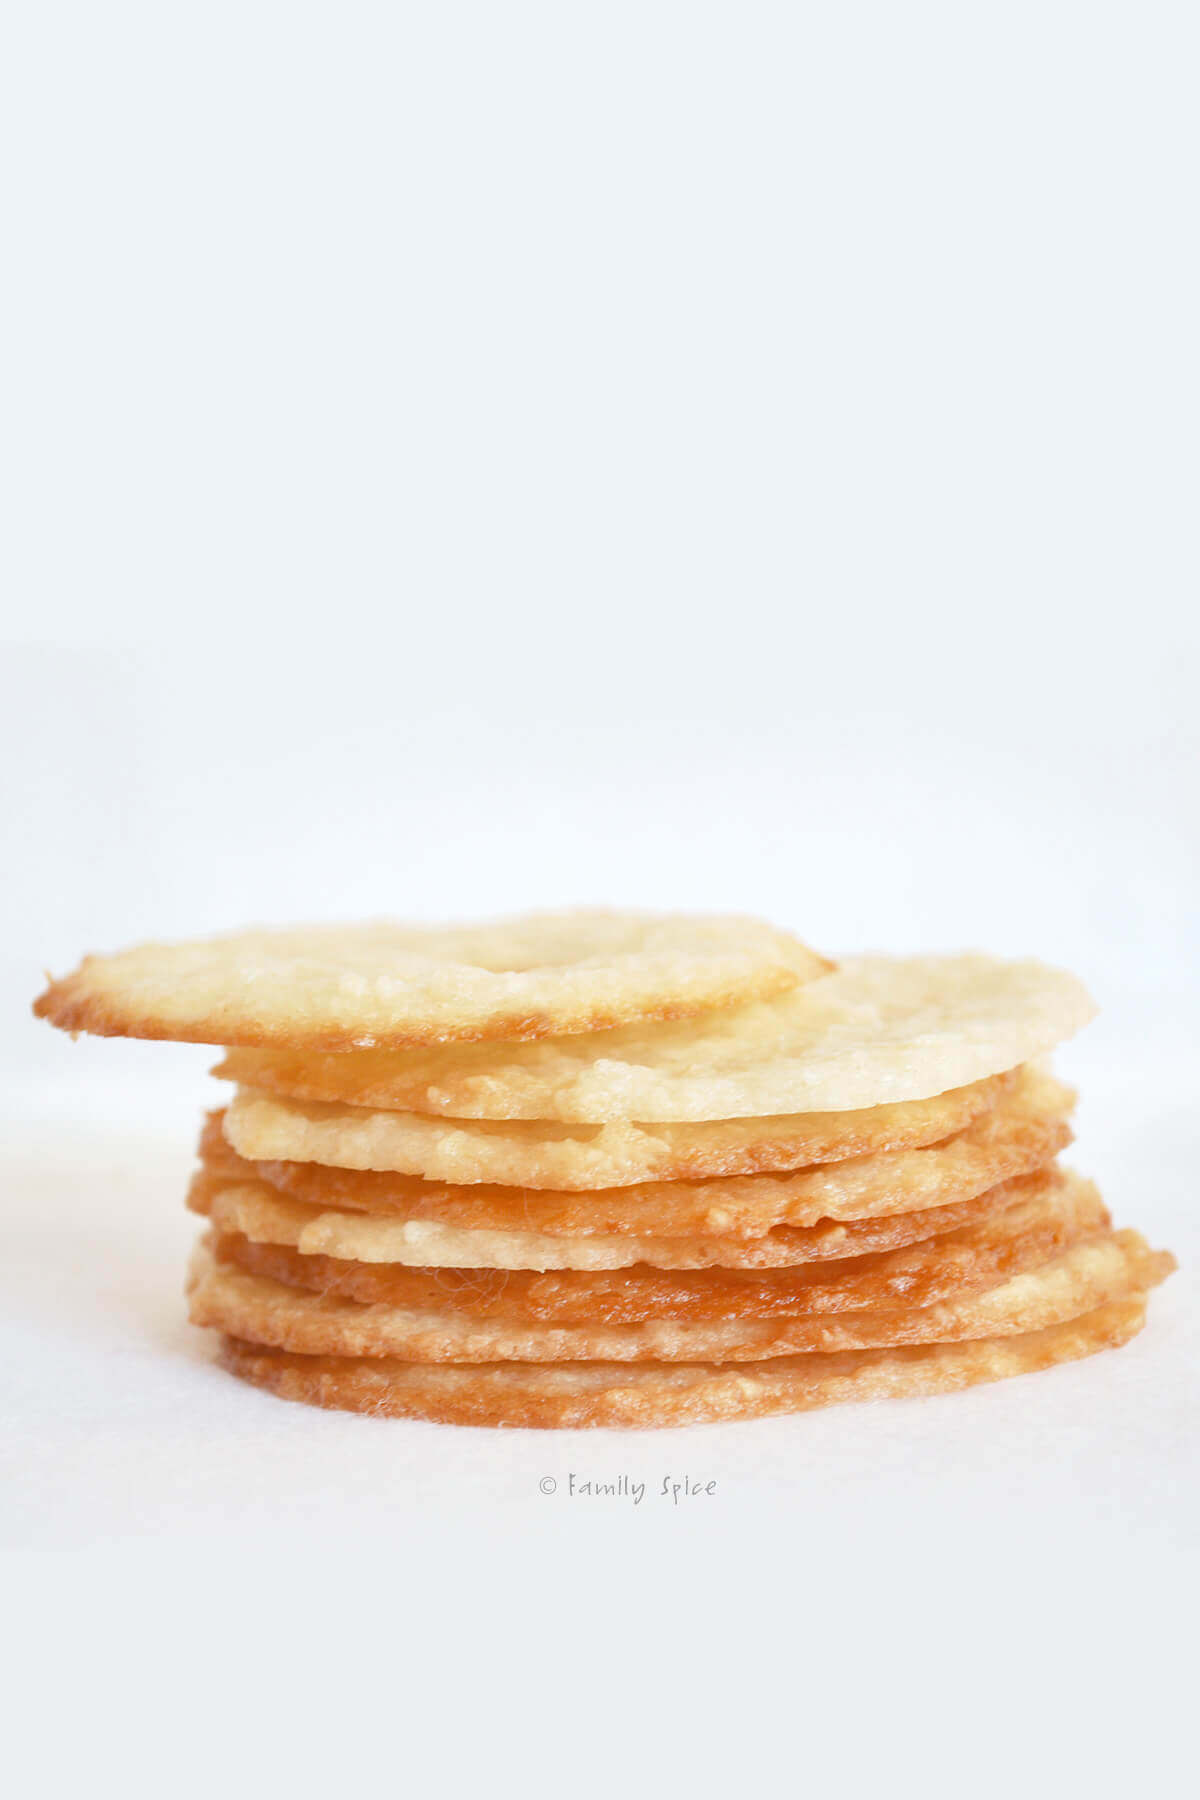 Side view showing a stack of coconut thin cookies on a white surface